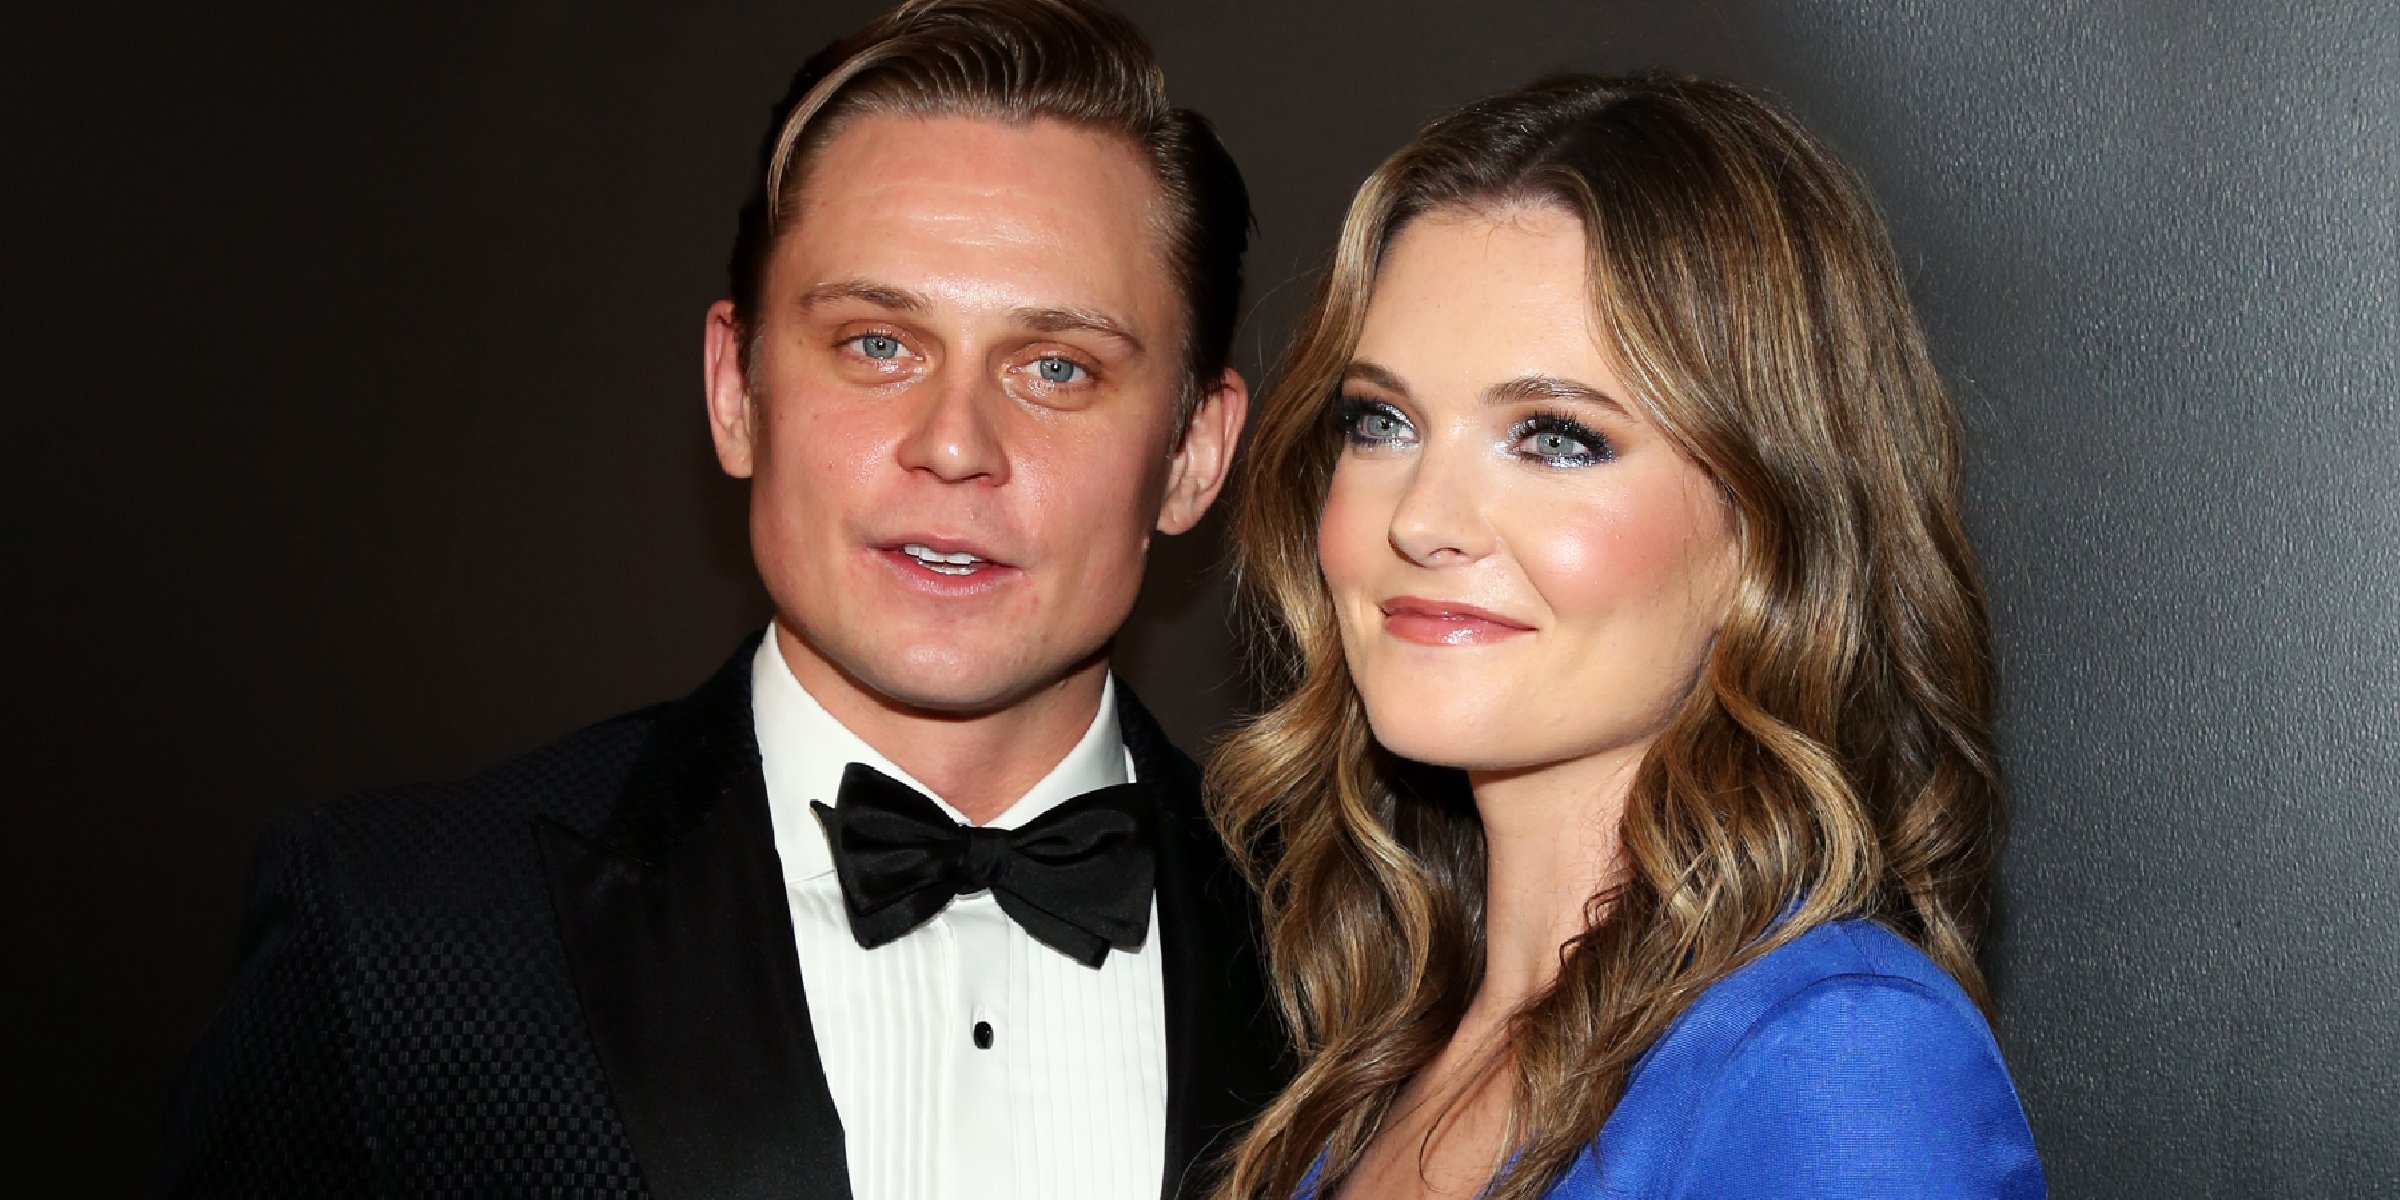 A Look inside Billy Magnussen and Meghann Fahy's Love Story